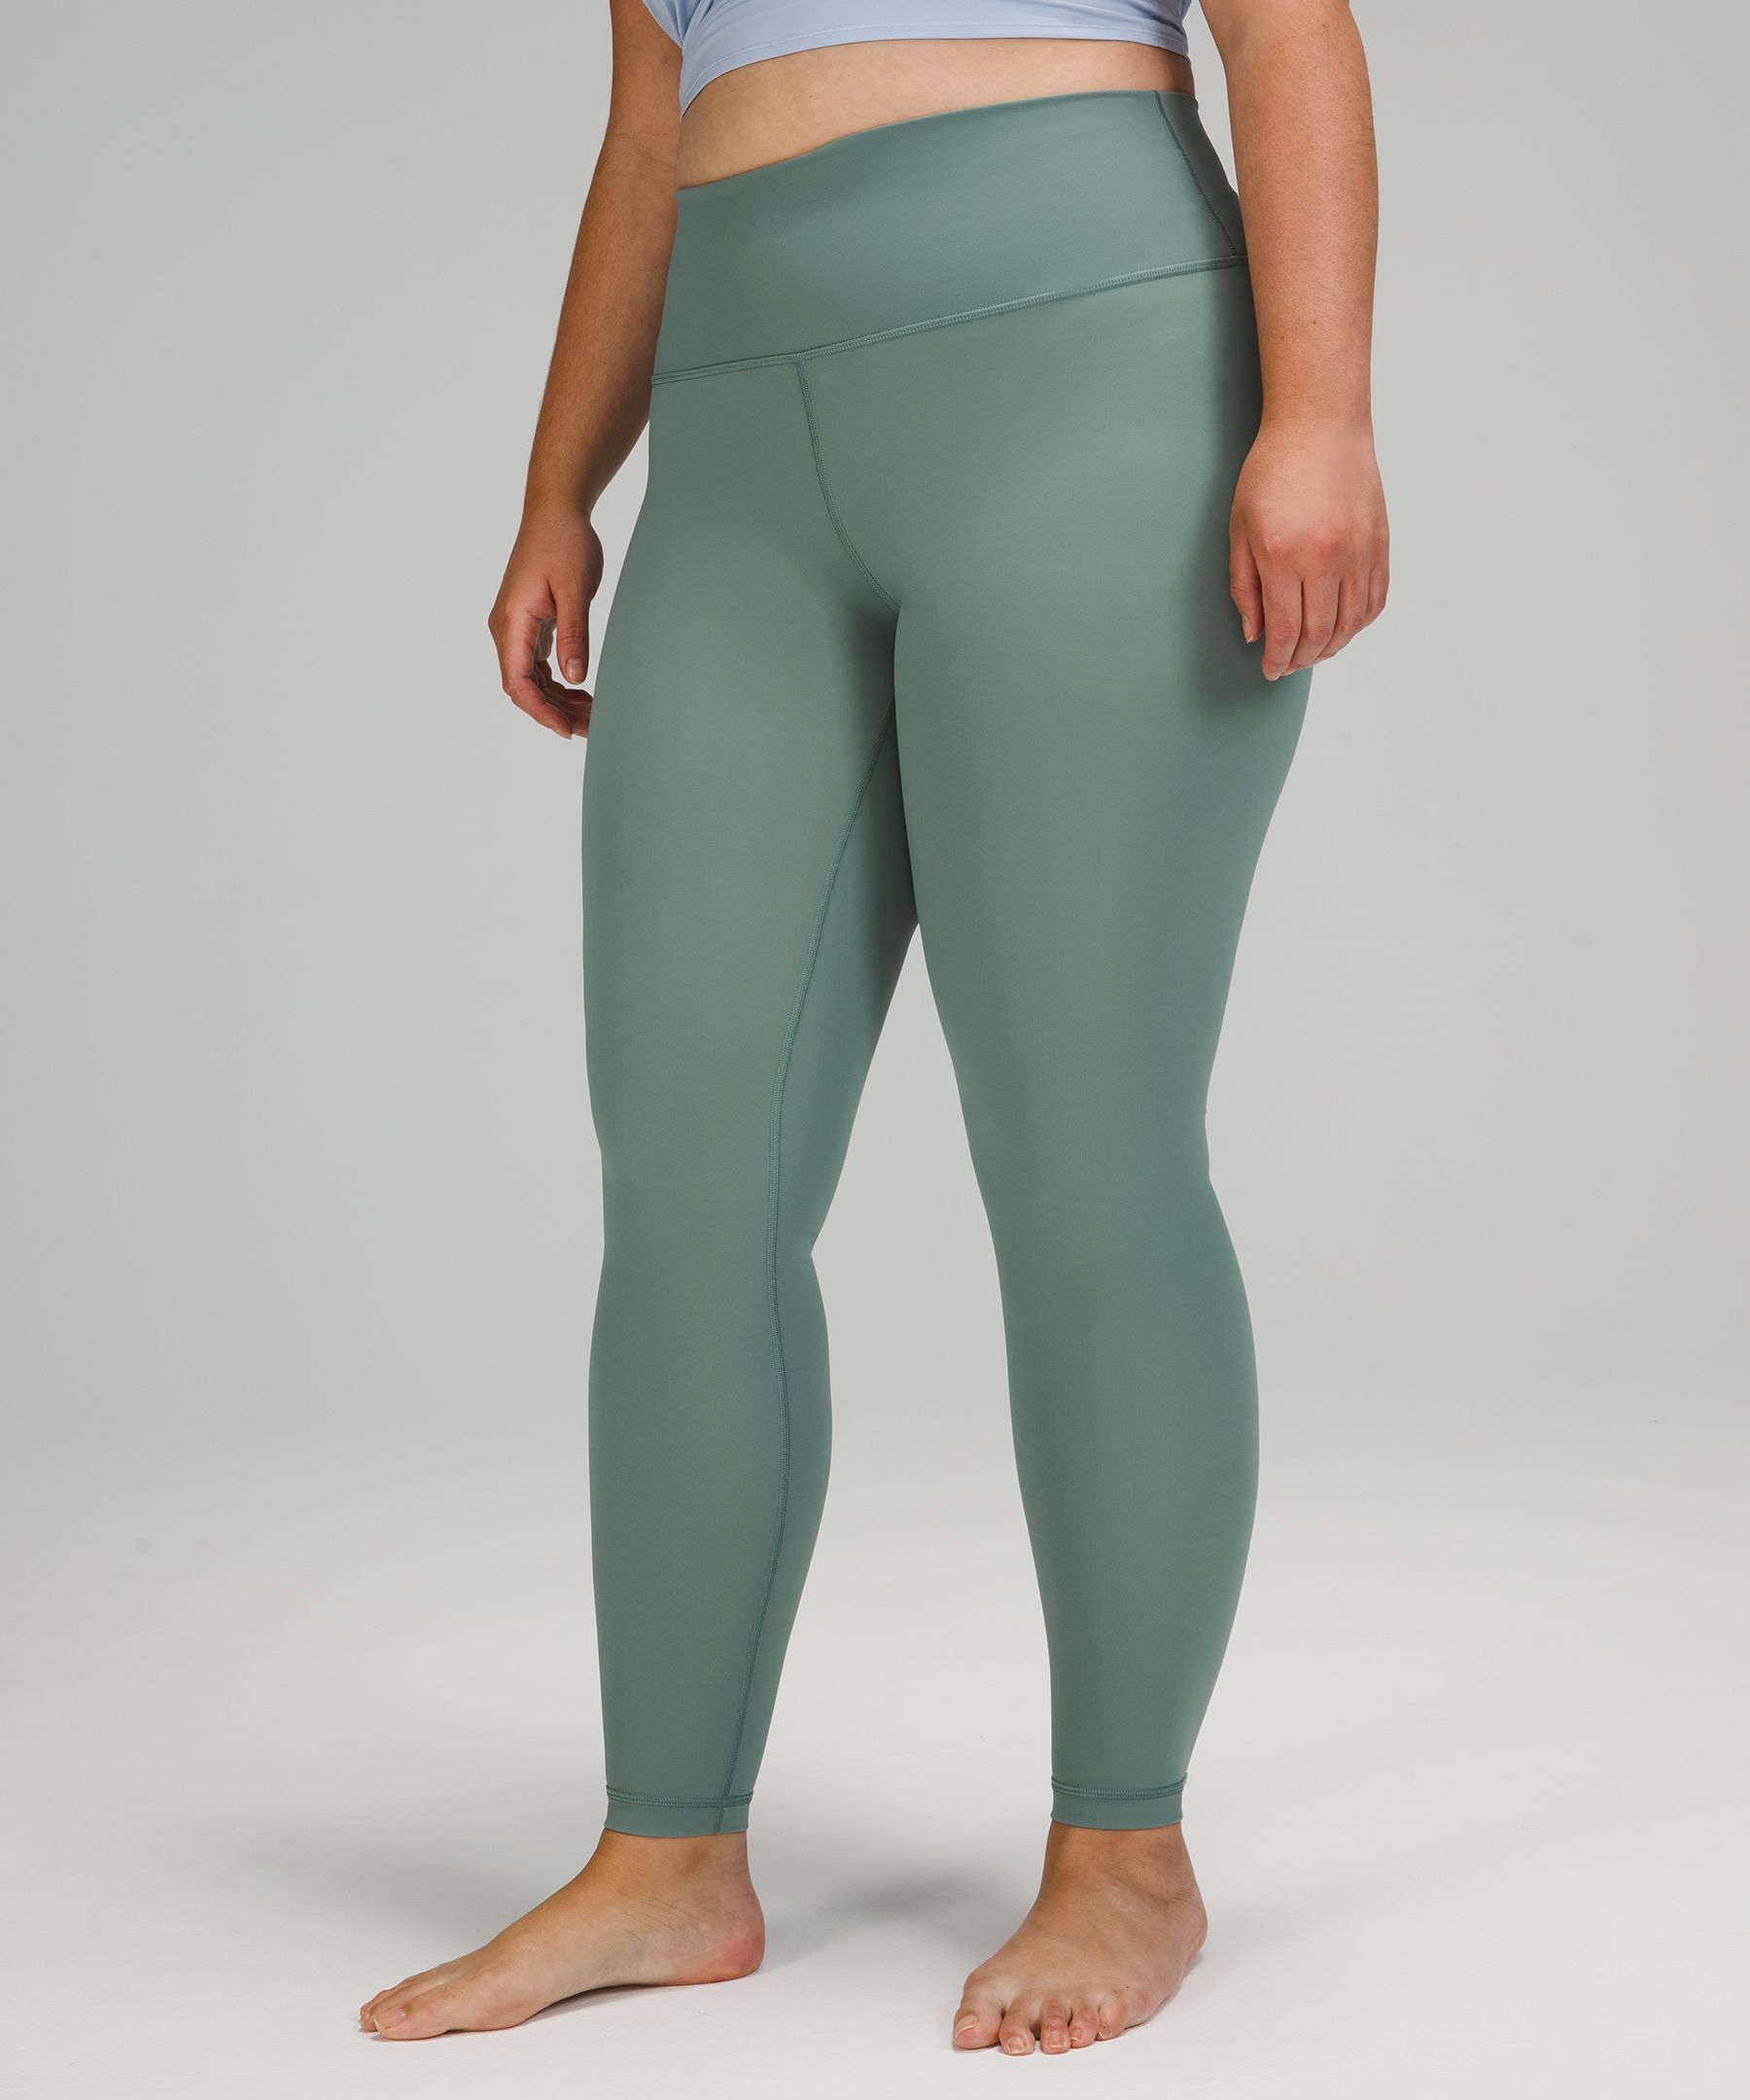 Lululemon Wunder Under High-rise Tights 28" Luxtreme In Tidewater Teal